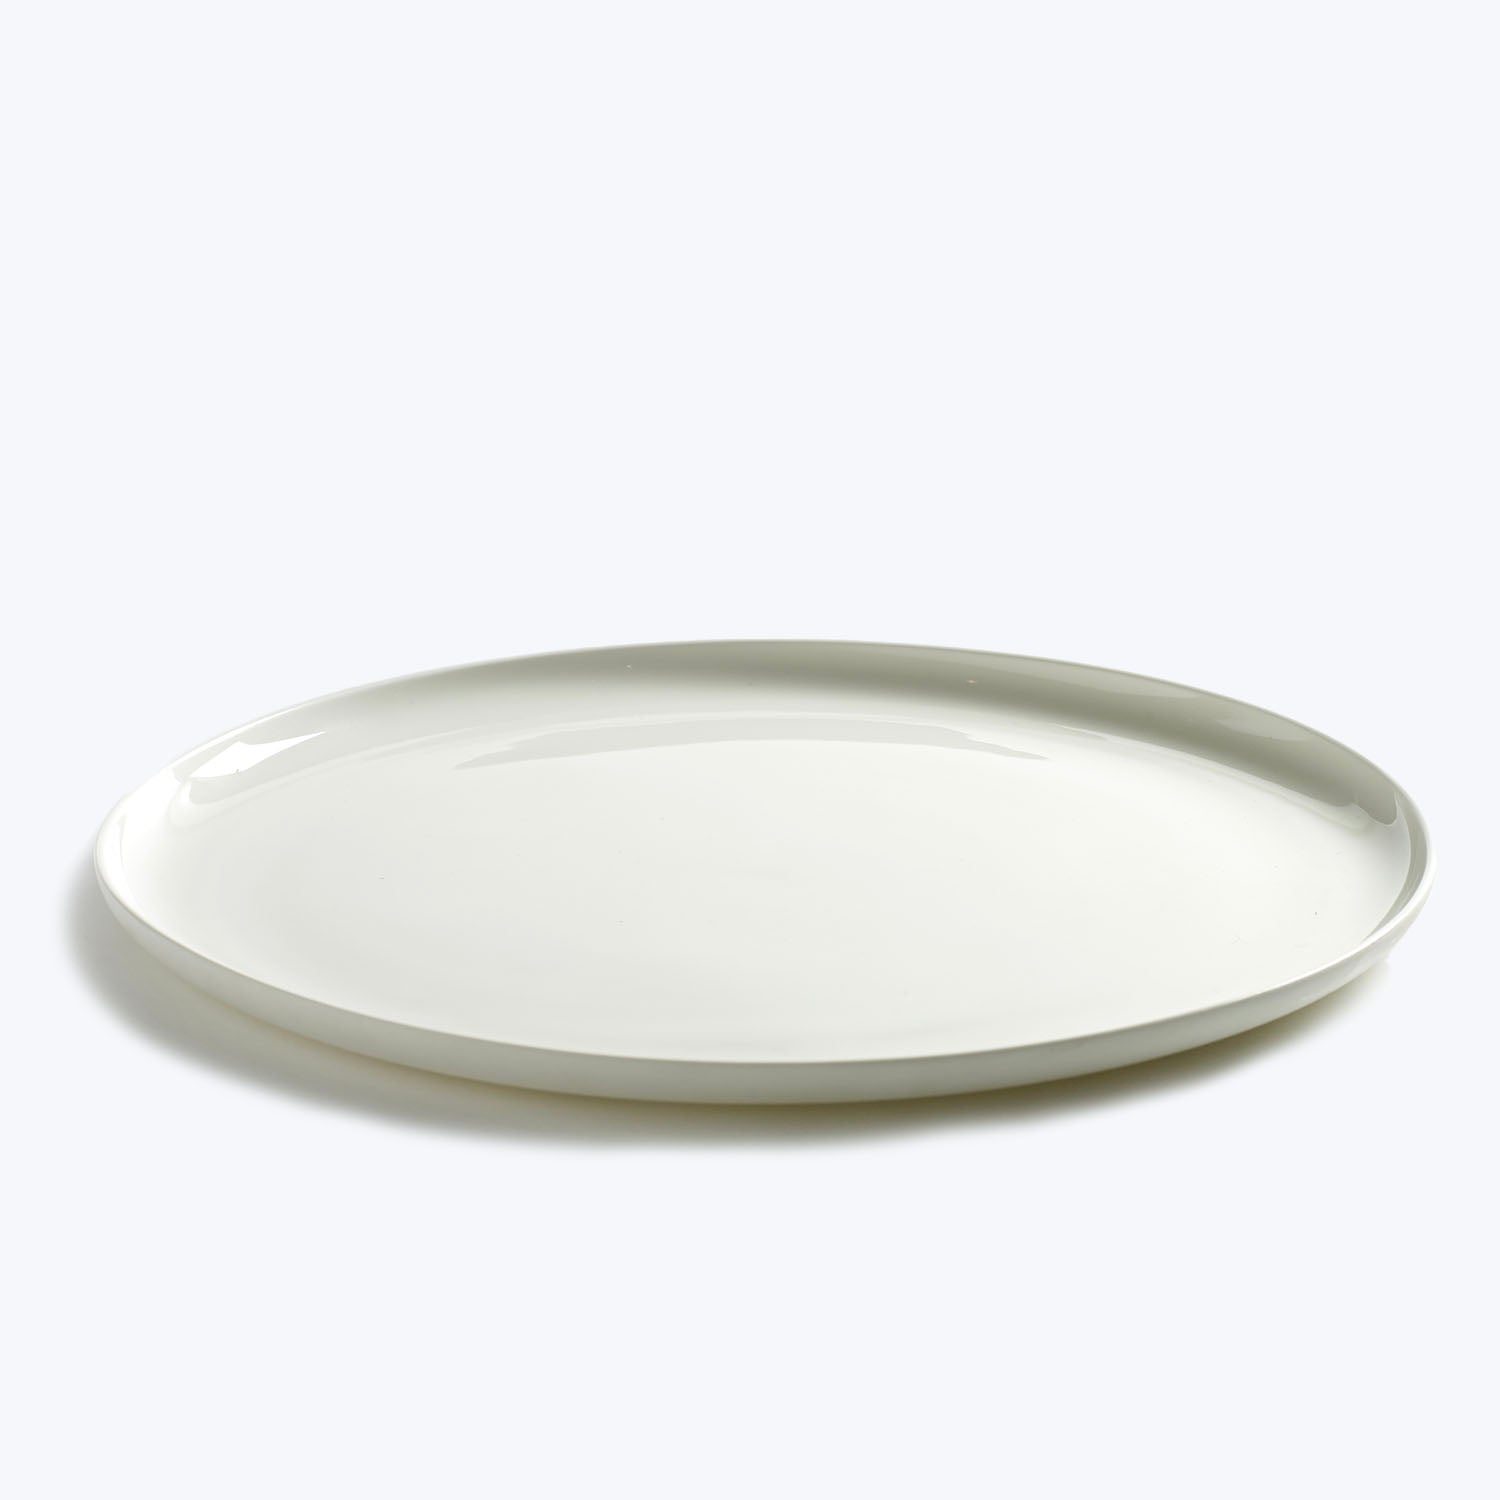 Piet Boon Base Tableware Collection Matte White / XLarge Plate (Set of 4)